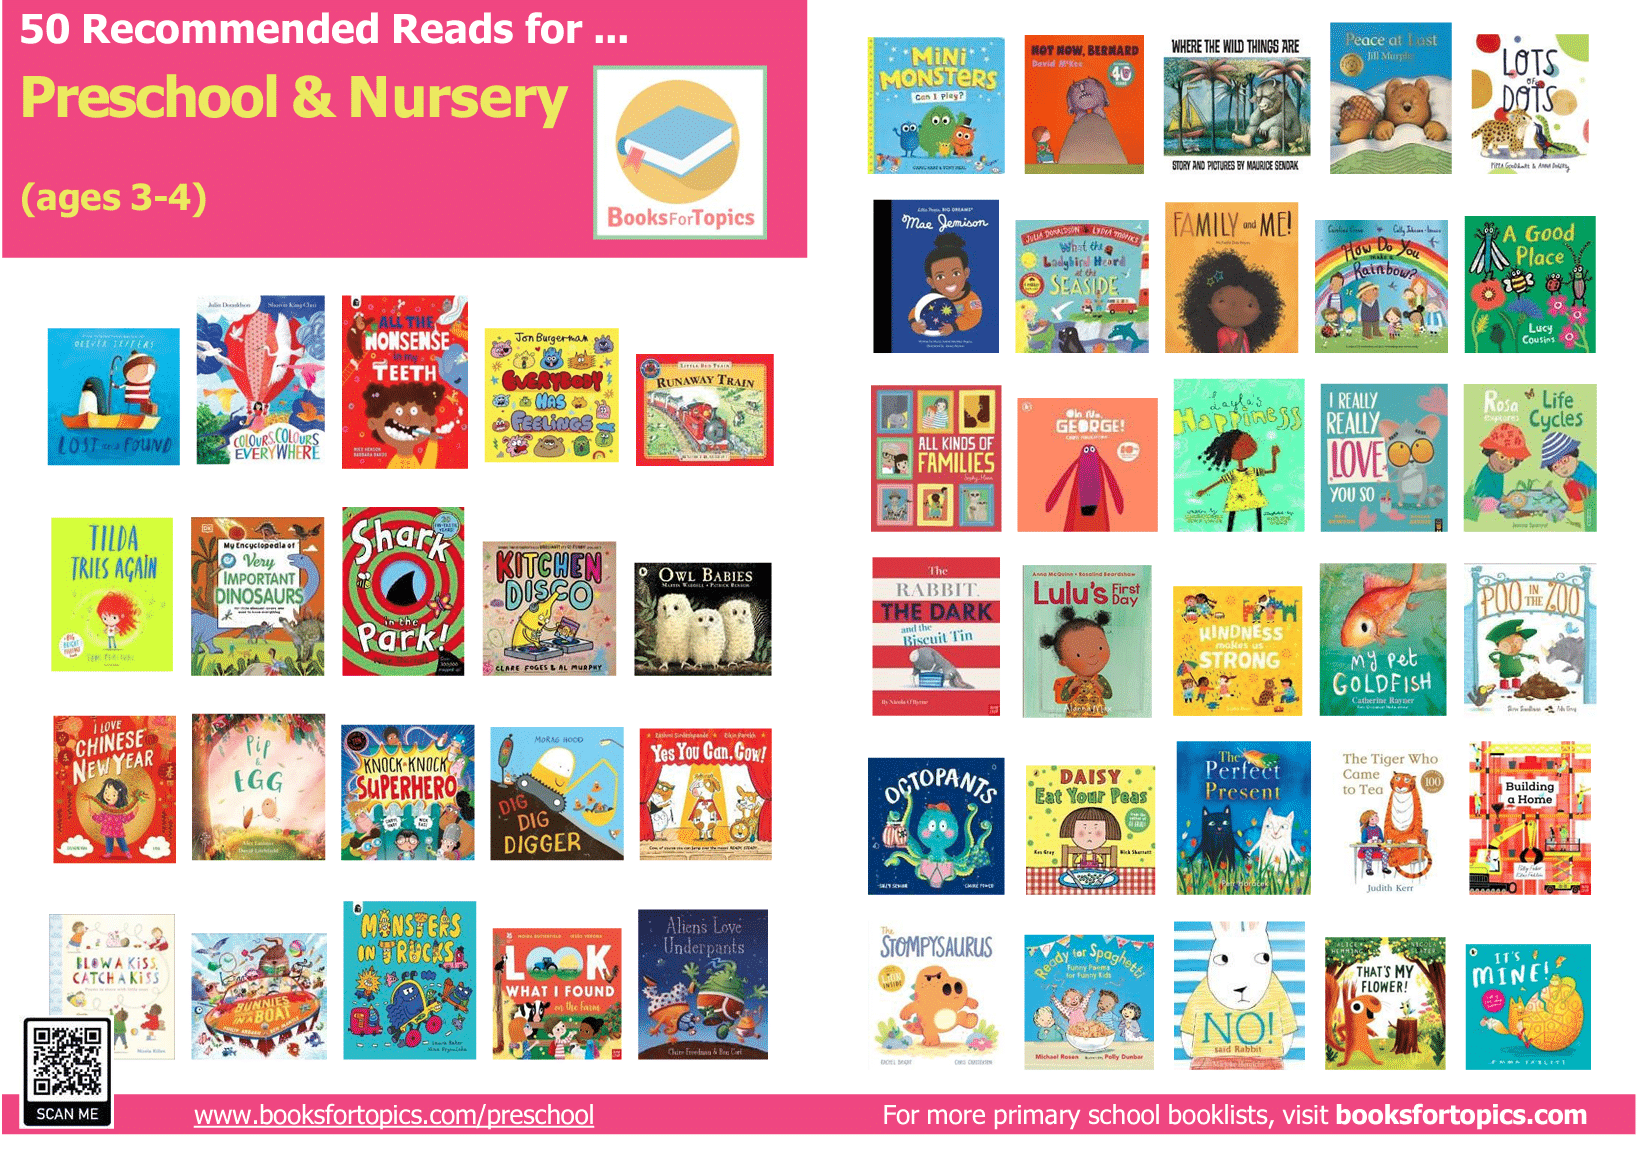 preschool recommended reading list poster